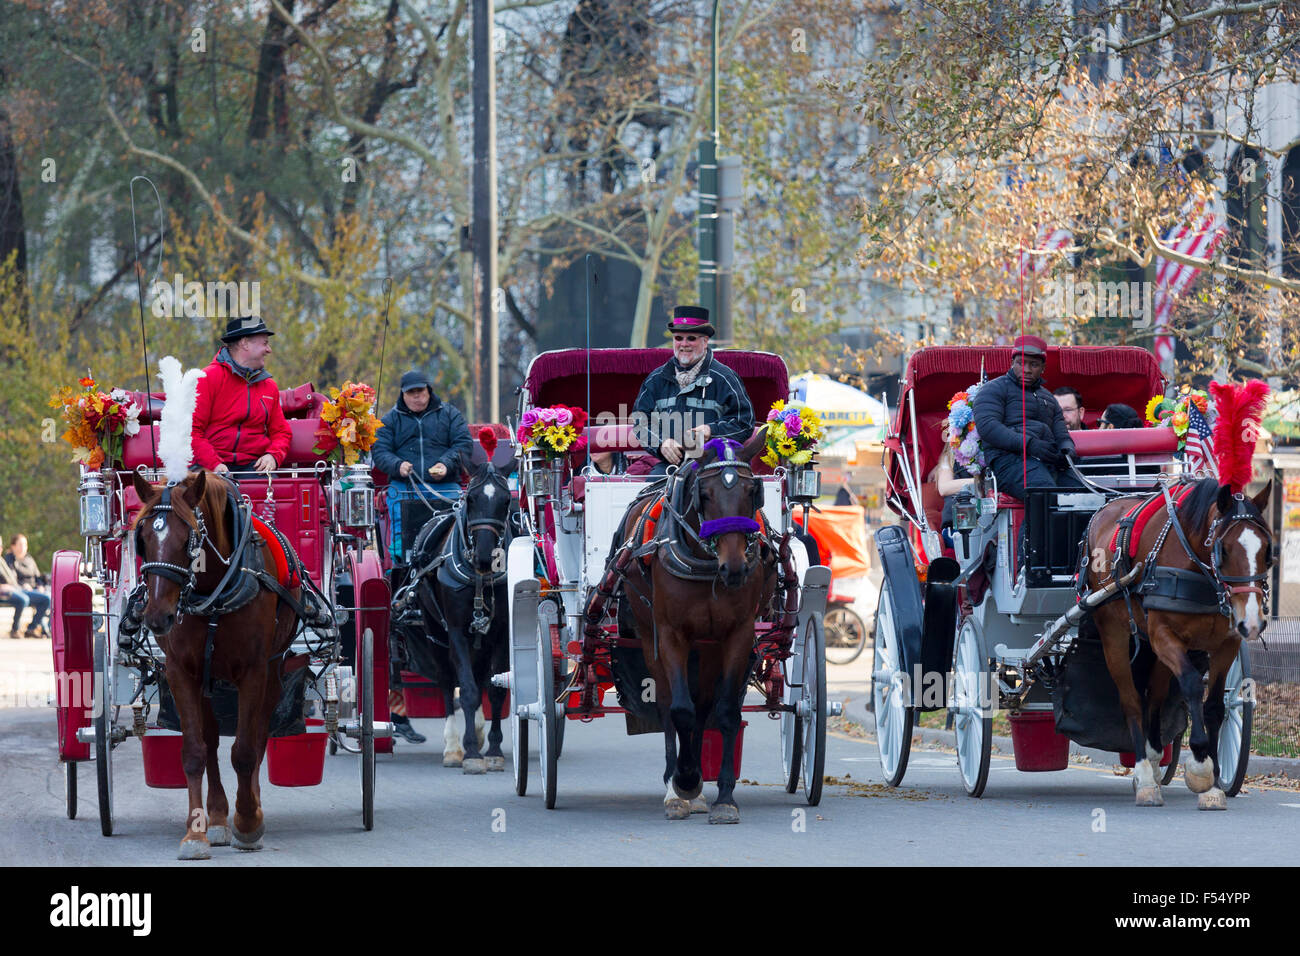 Tourists taking traditional horse and carriage ride in winter time in Central Park, New York, USA Stock Photo